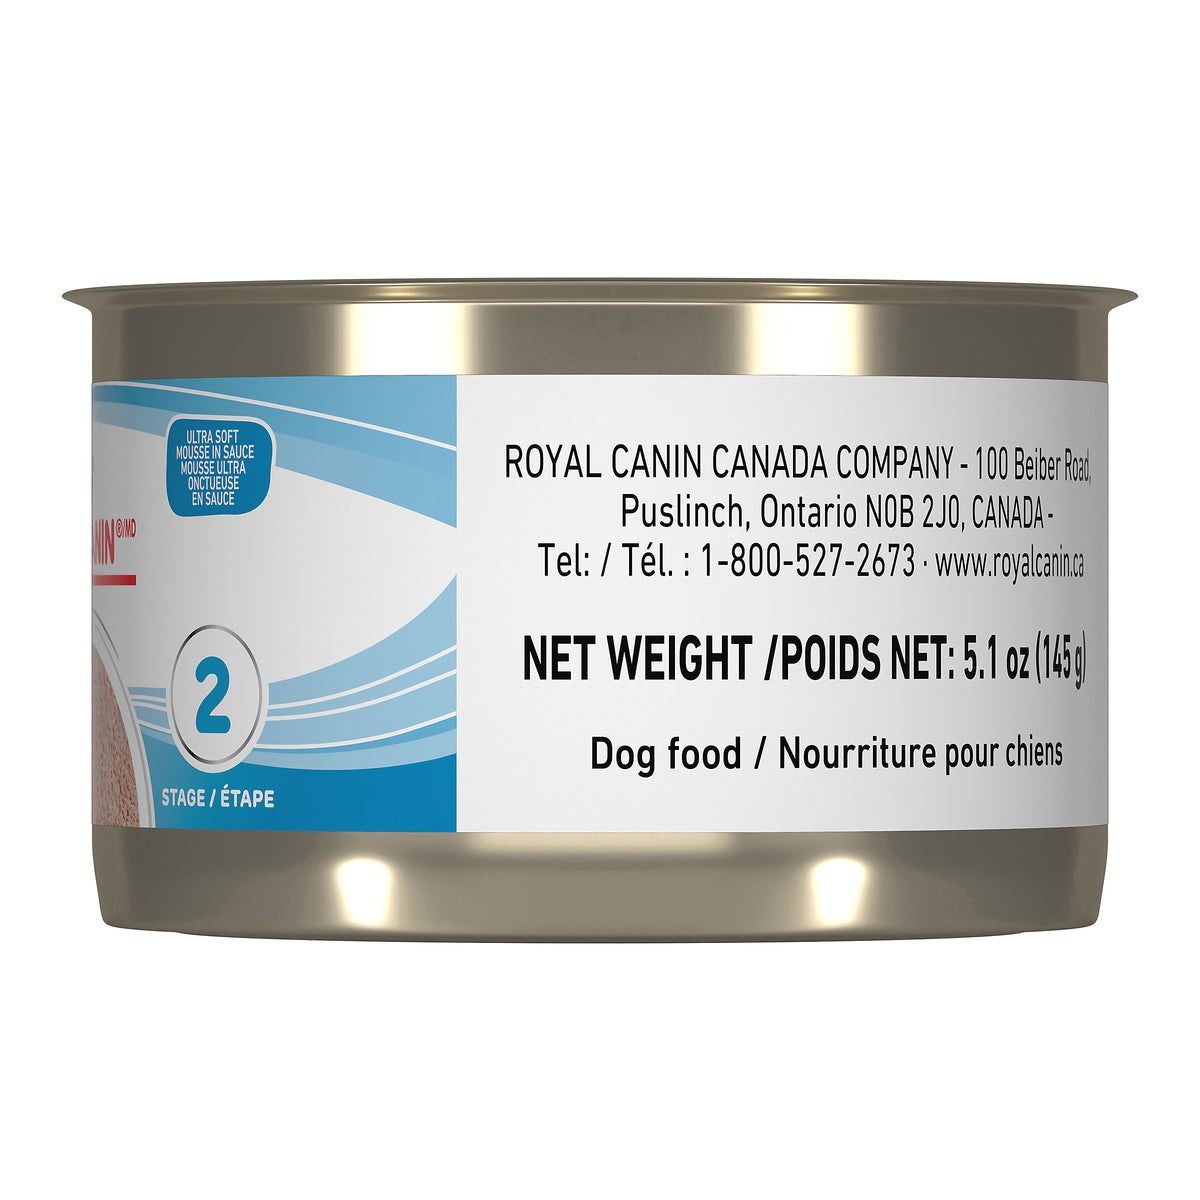 Royal Canin Starter Mousse - Canned Puppy / Dog Food (145g)